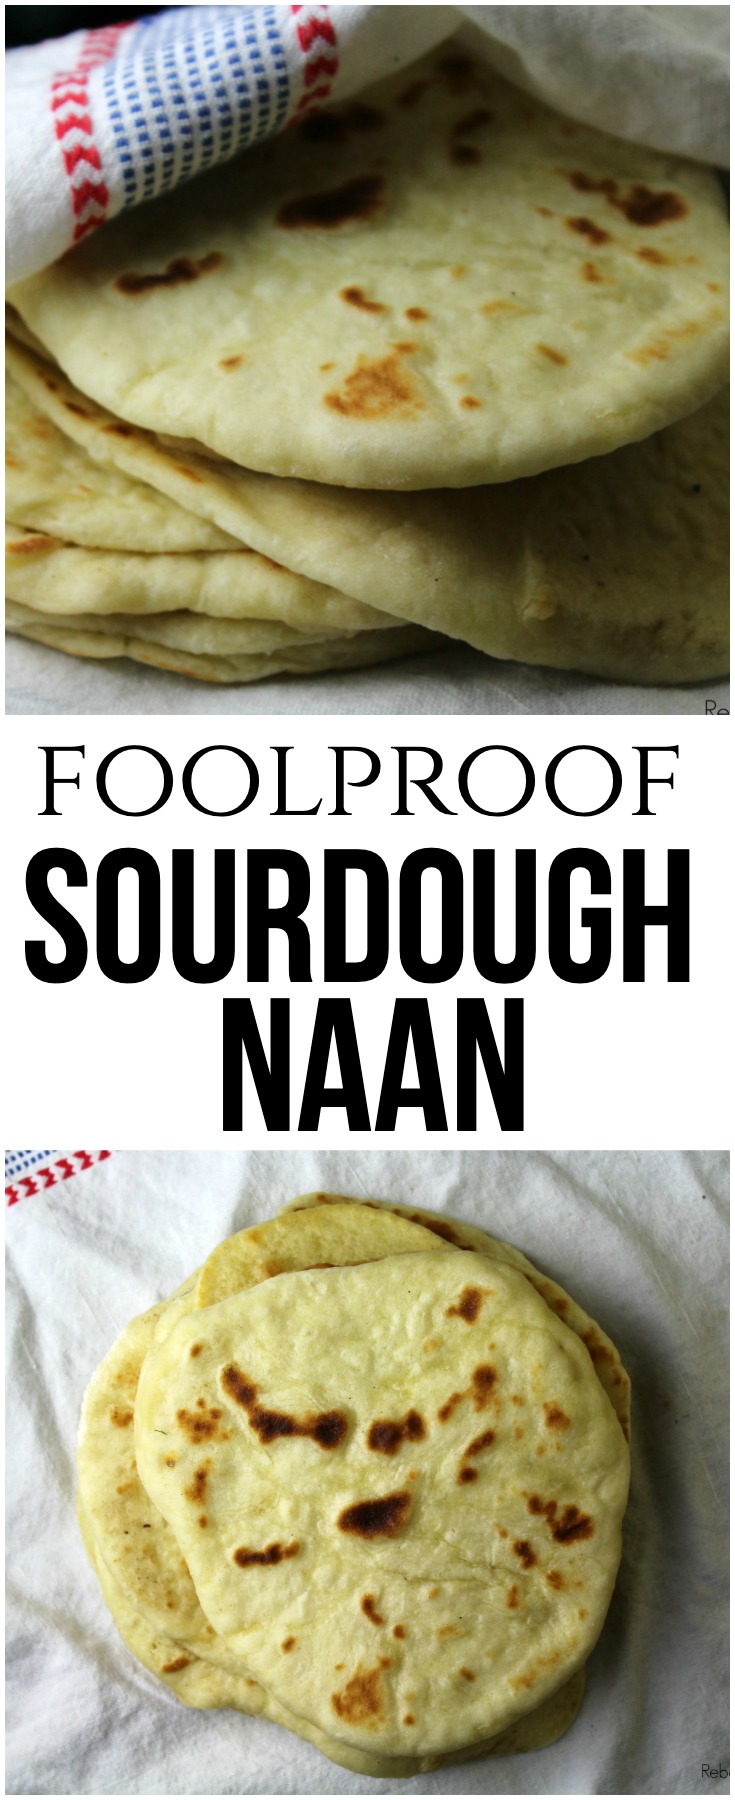 Foolproof Sourdough Naan that comes together easily with a few simple ingredients and an active sourdough starter for naan that's soft and full of flavor!  #sourdough #naan #homemade 